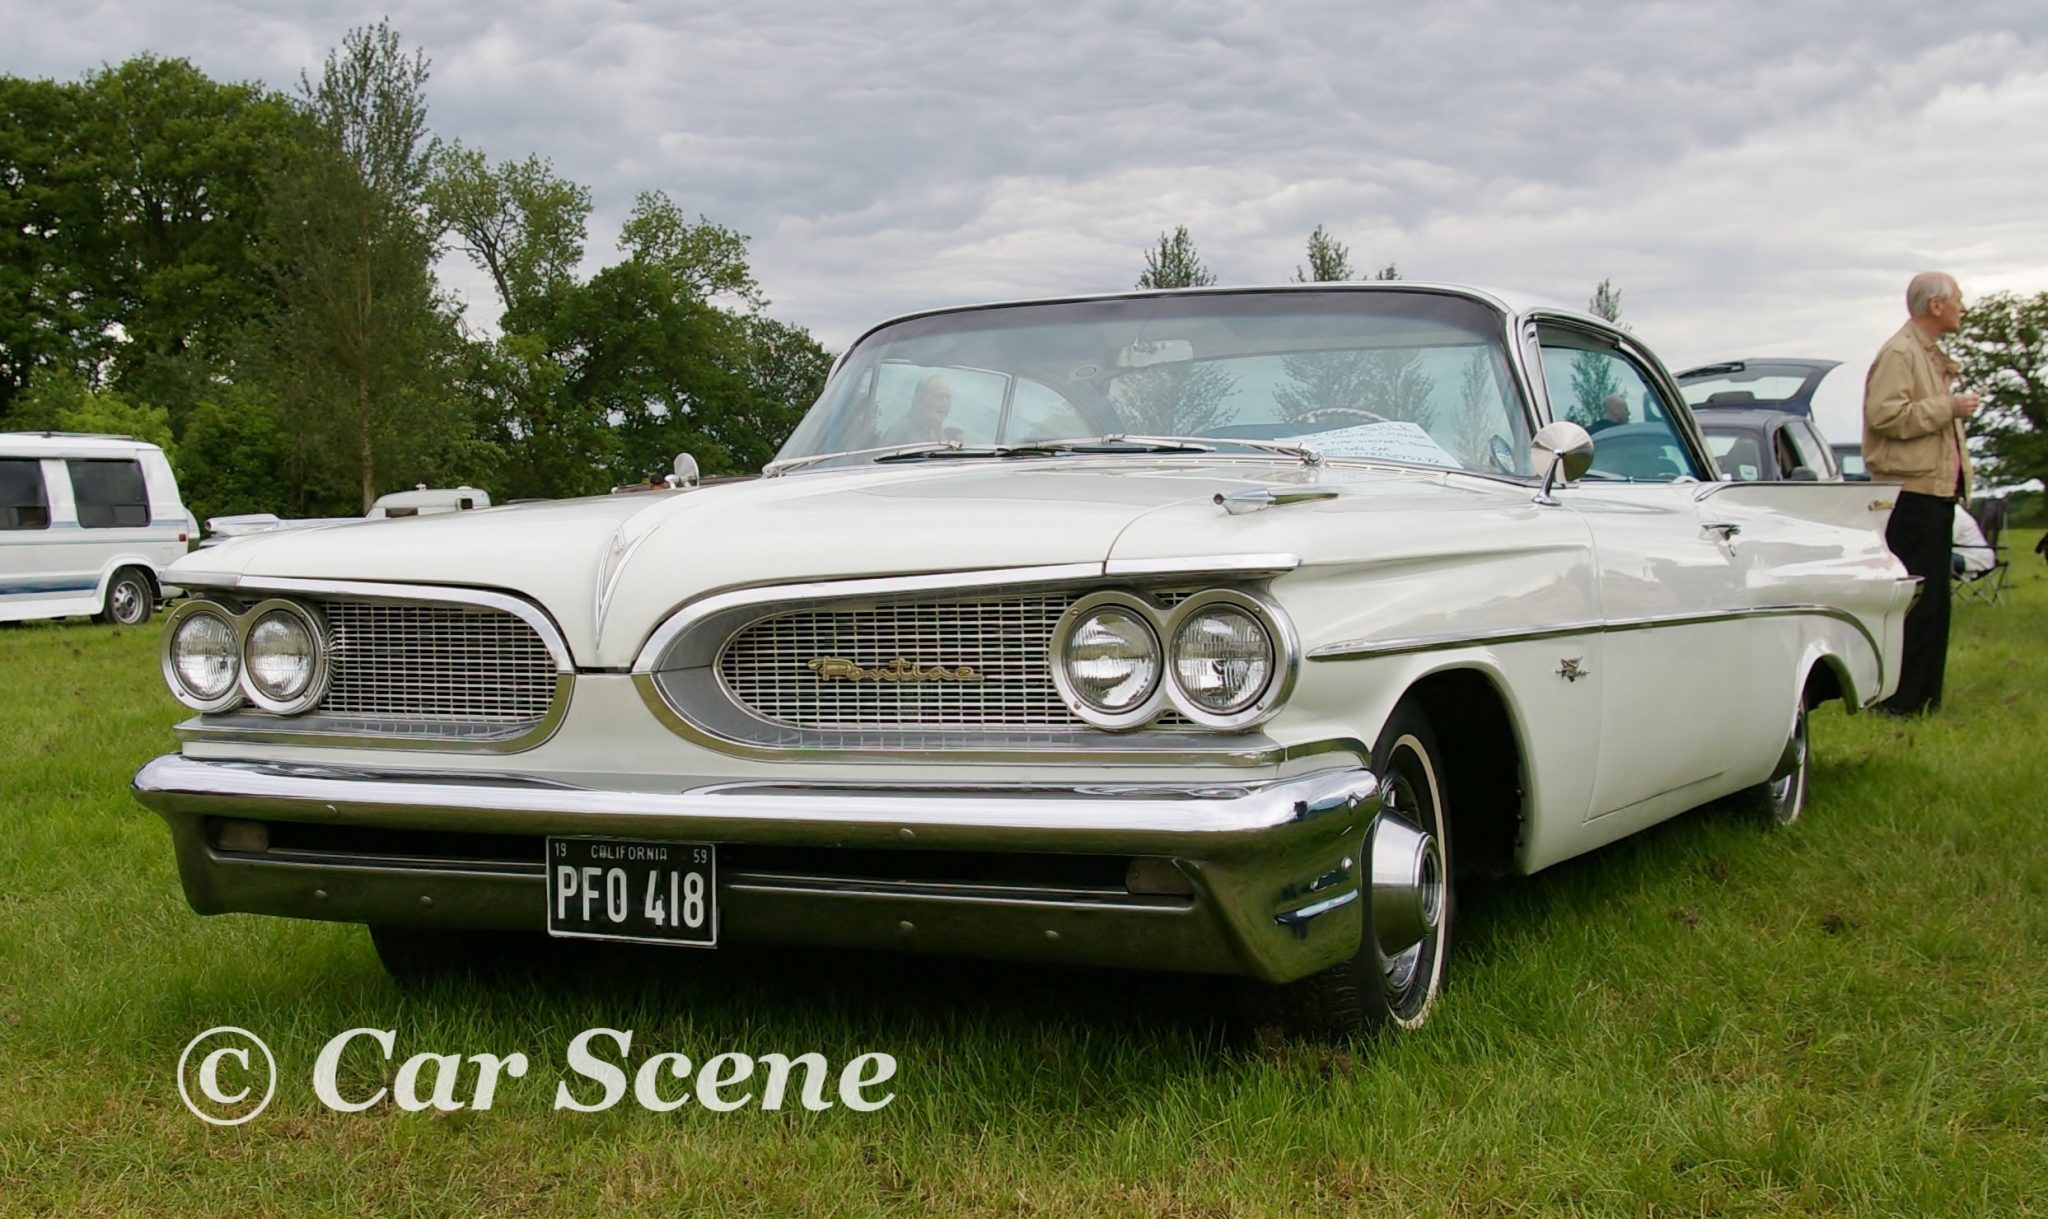 1959 Pontiac Catalina Coupe front view